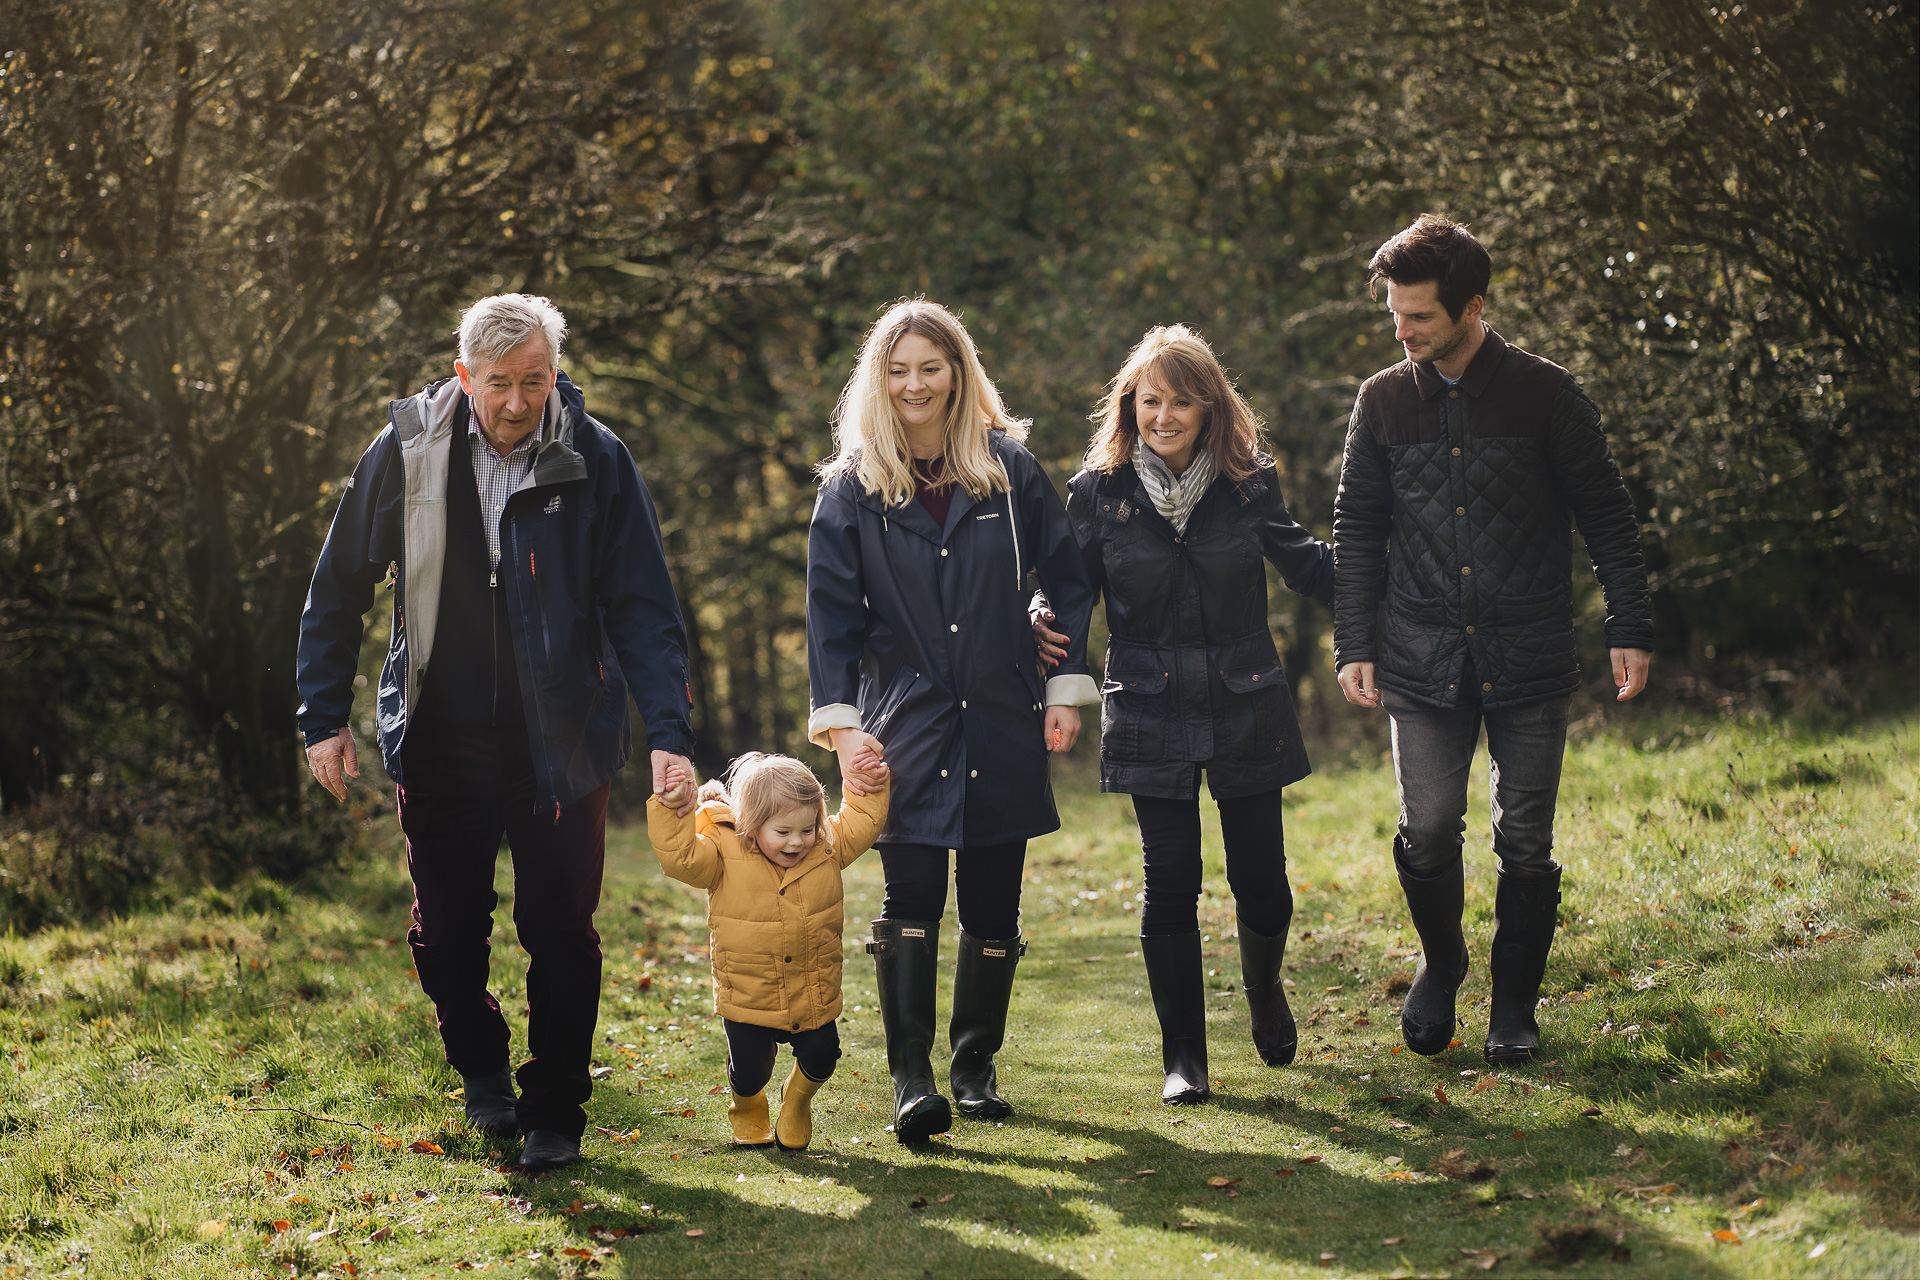 Dartmoor family photography of a family walking together in sunshine